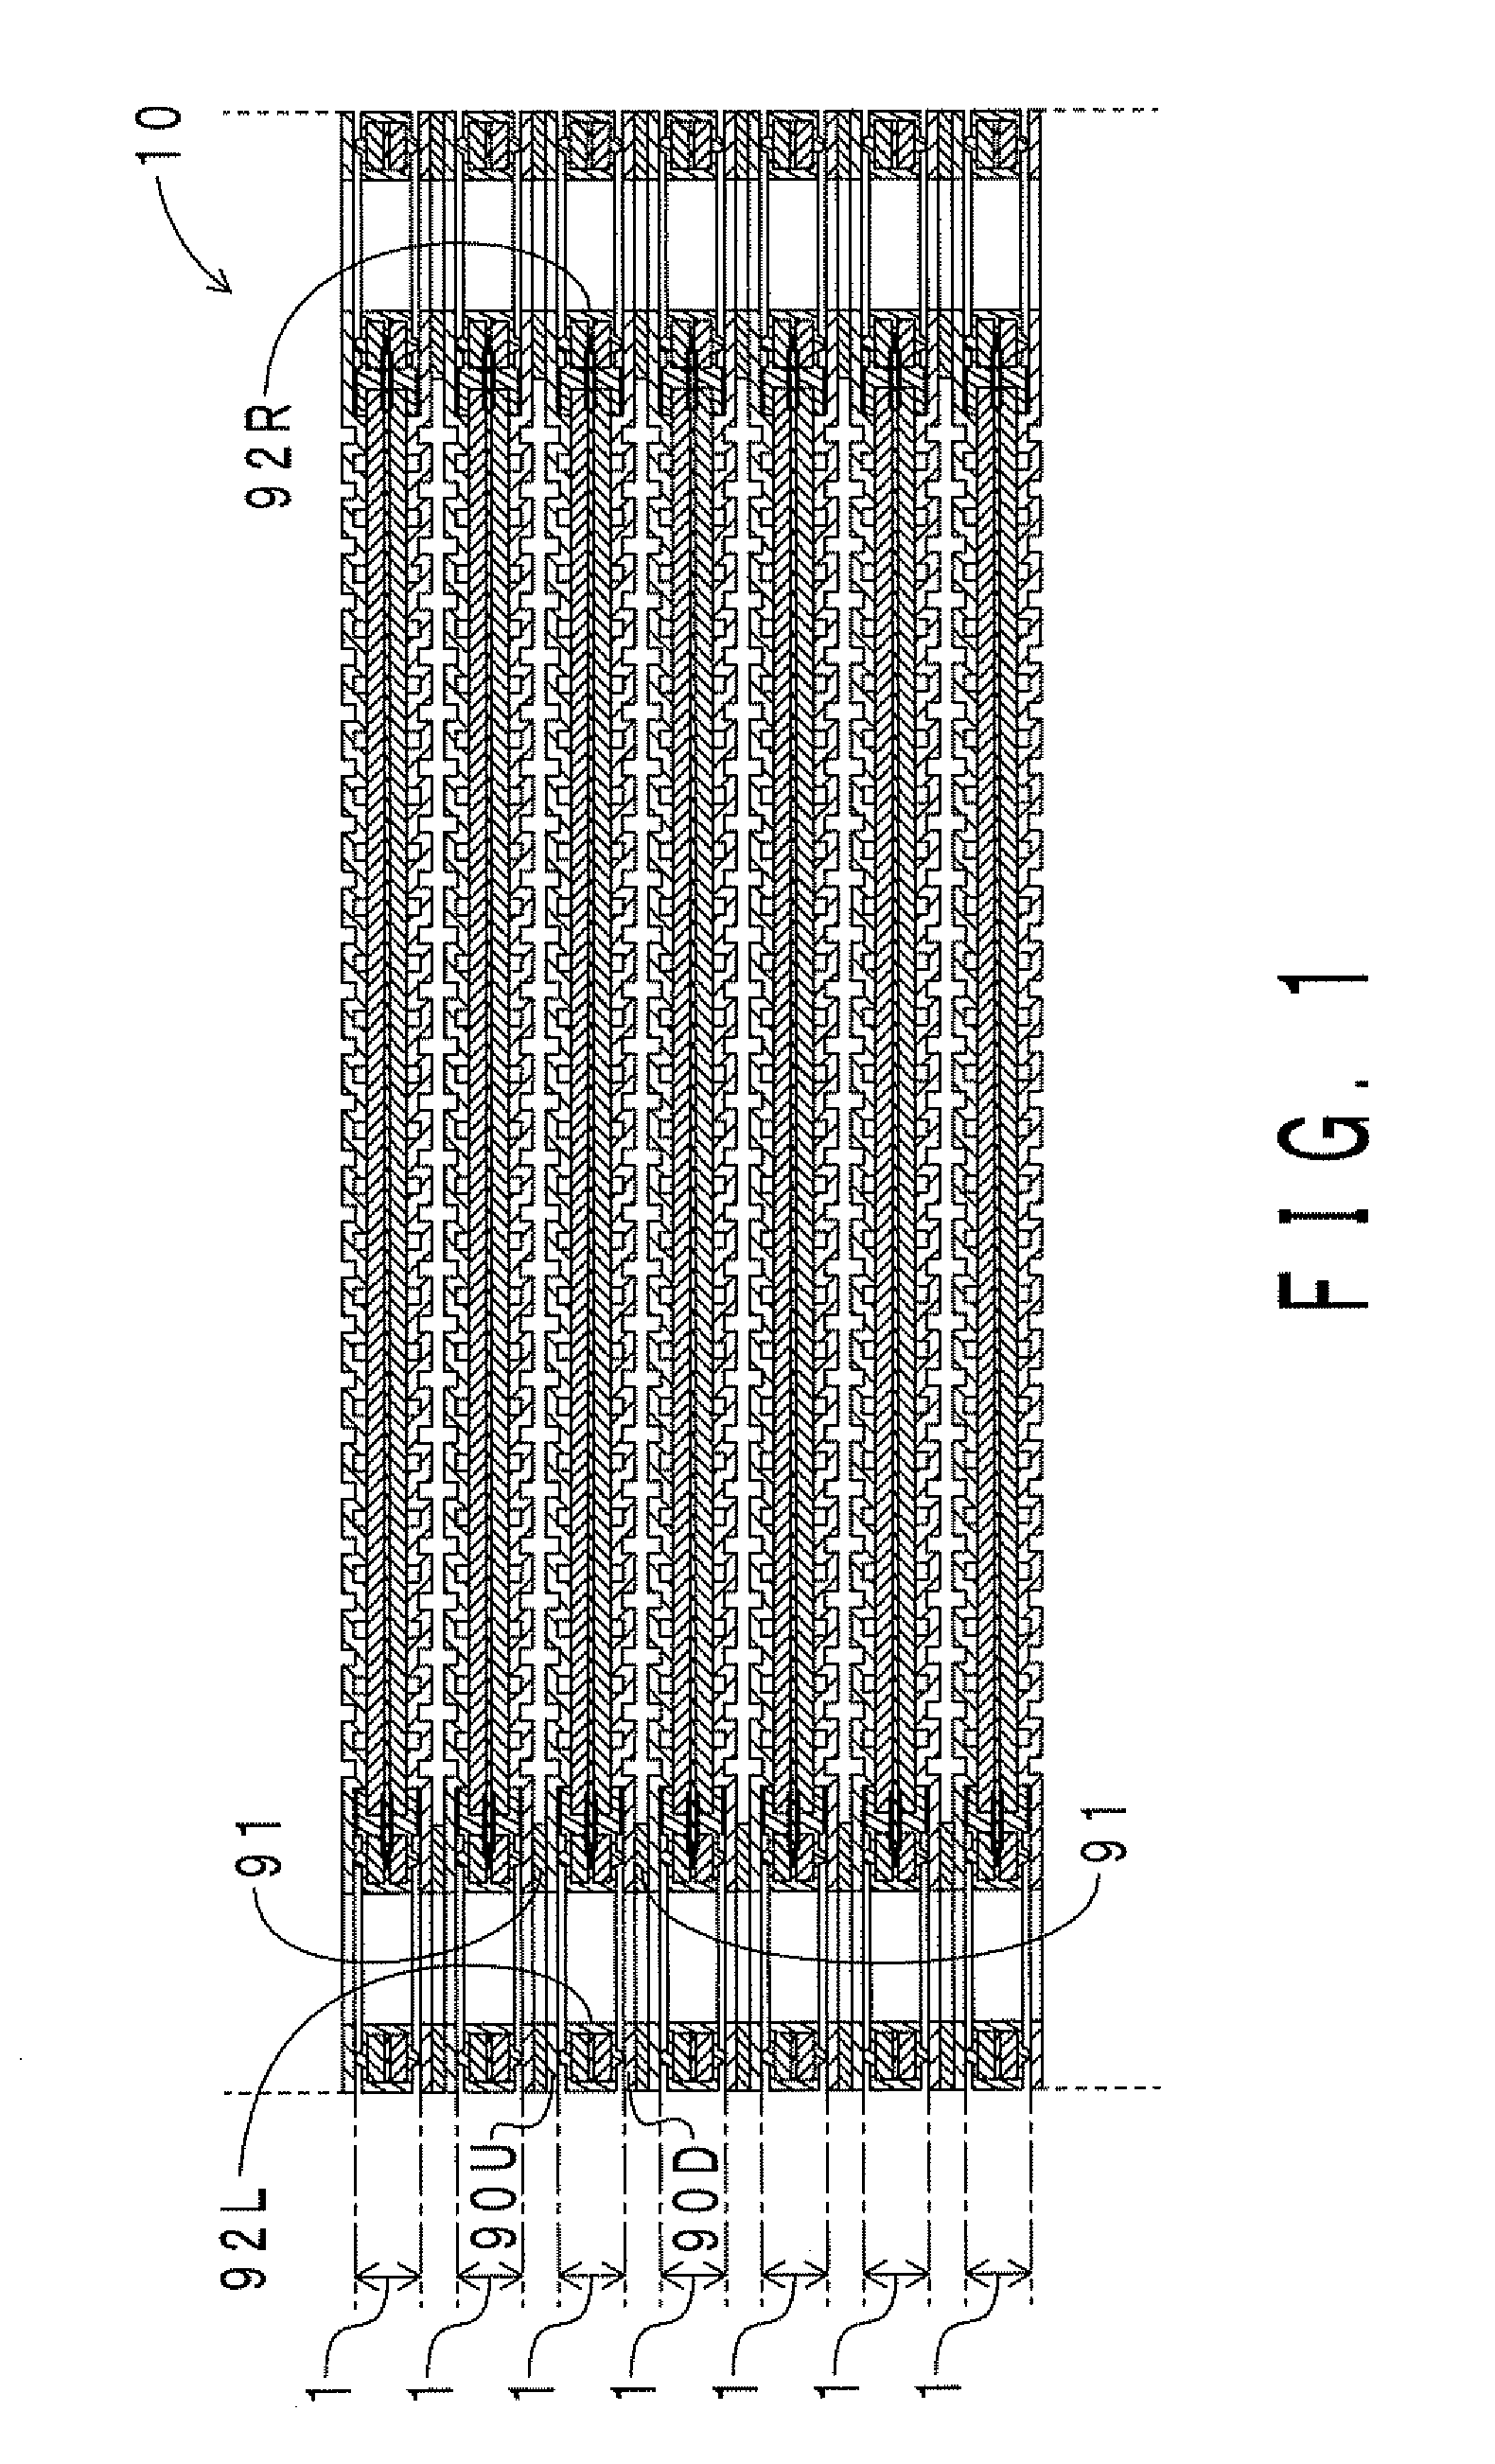 Fuel cell, fuel cell stack, and method for manufacturing fuel cell